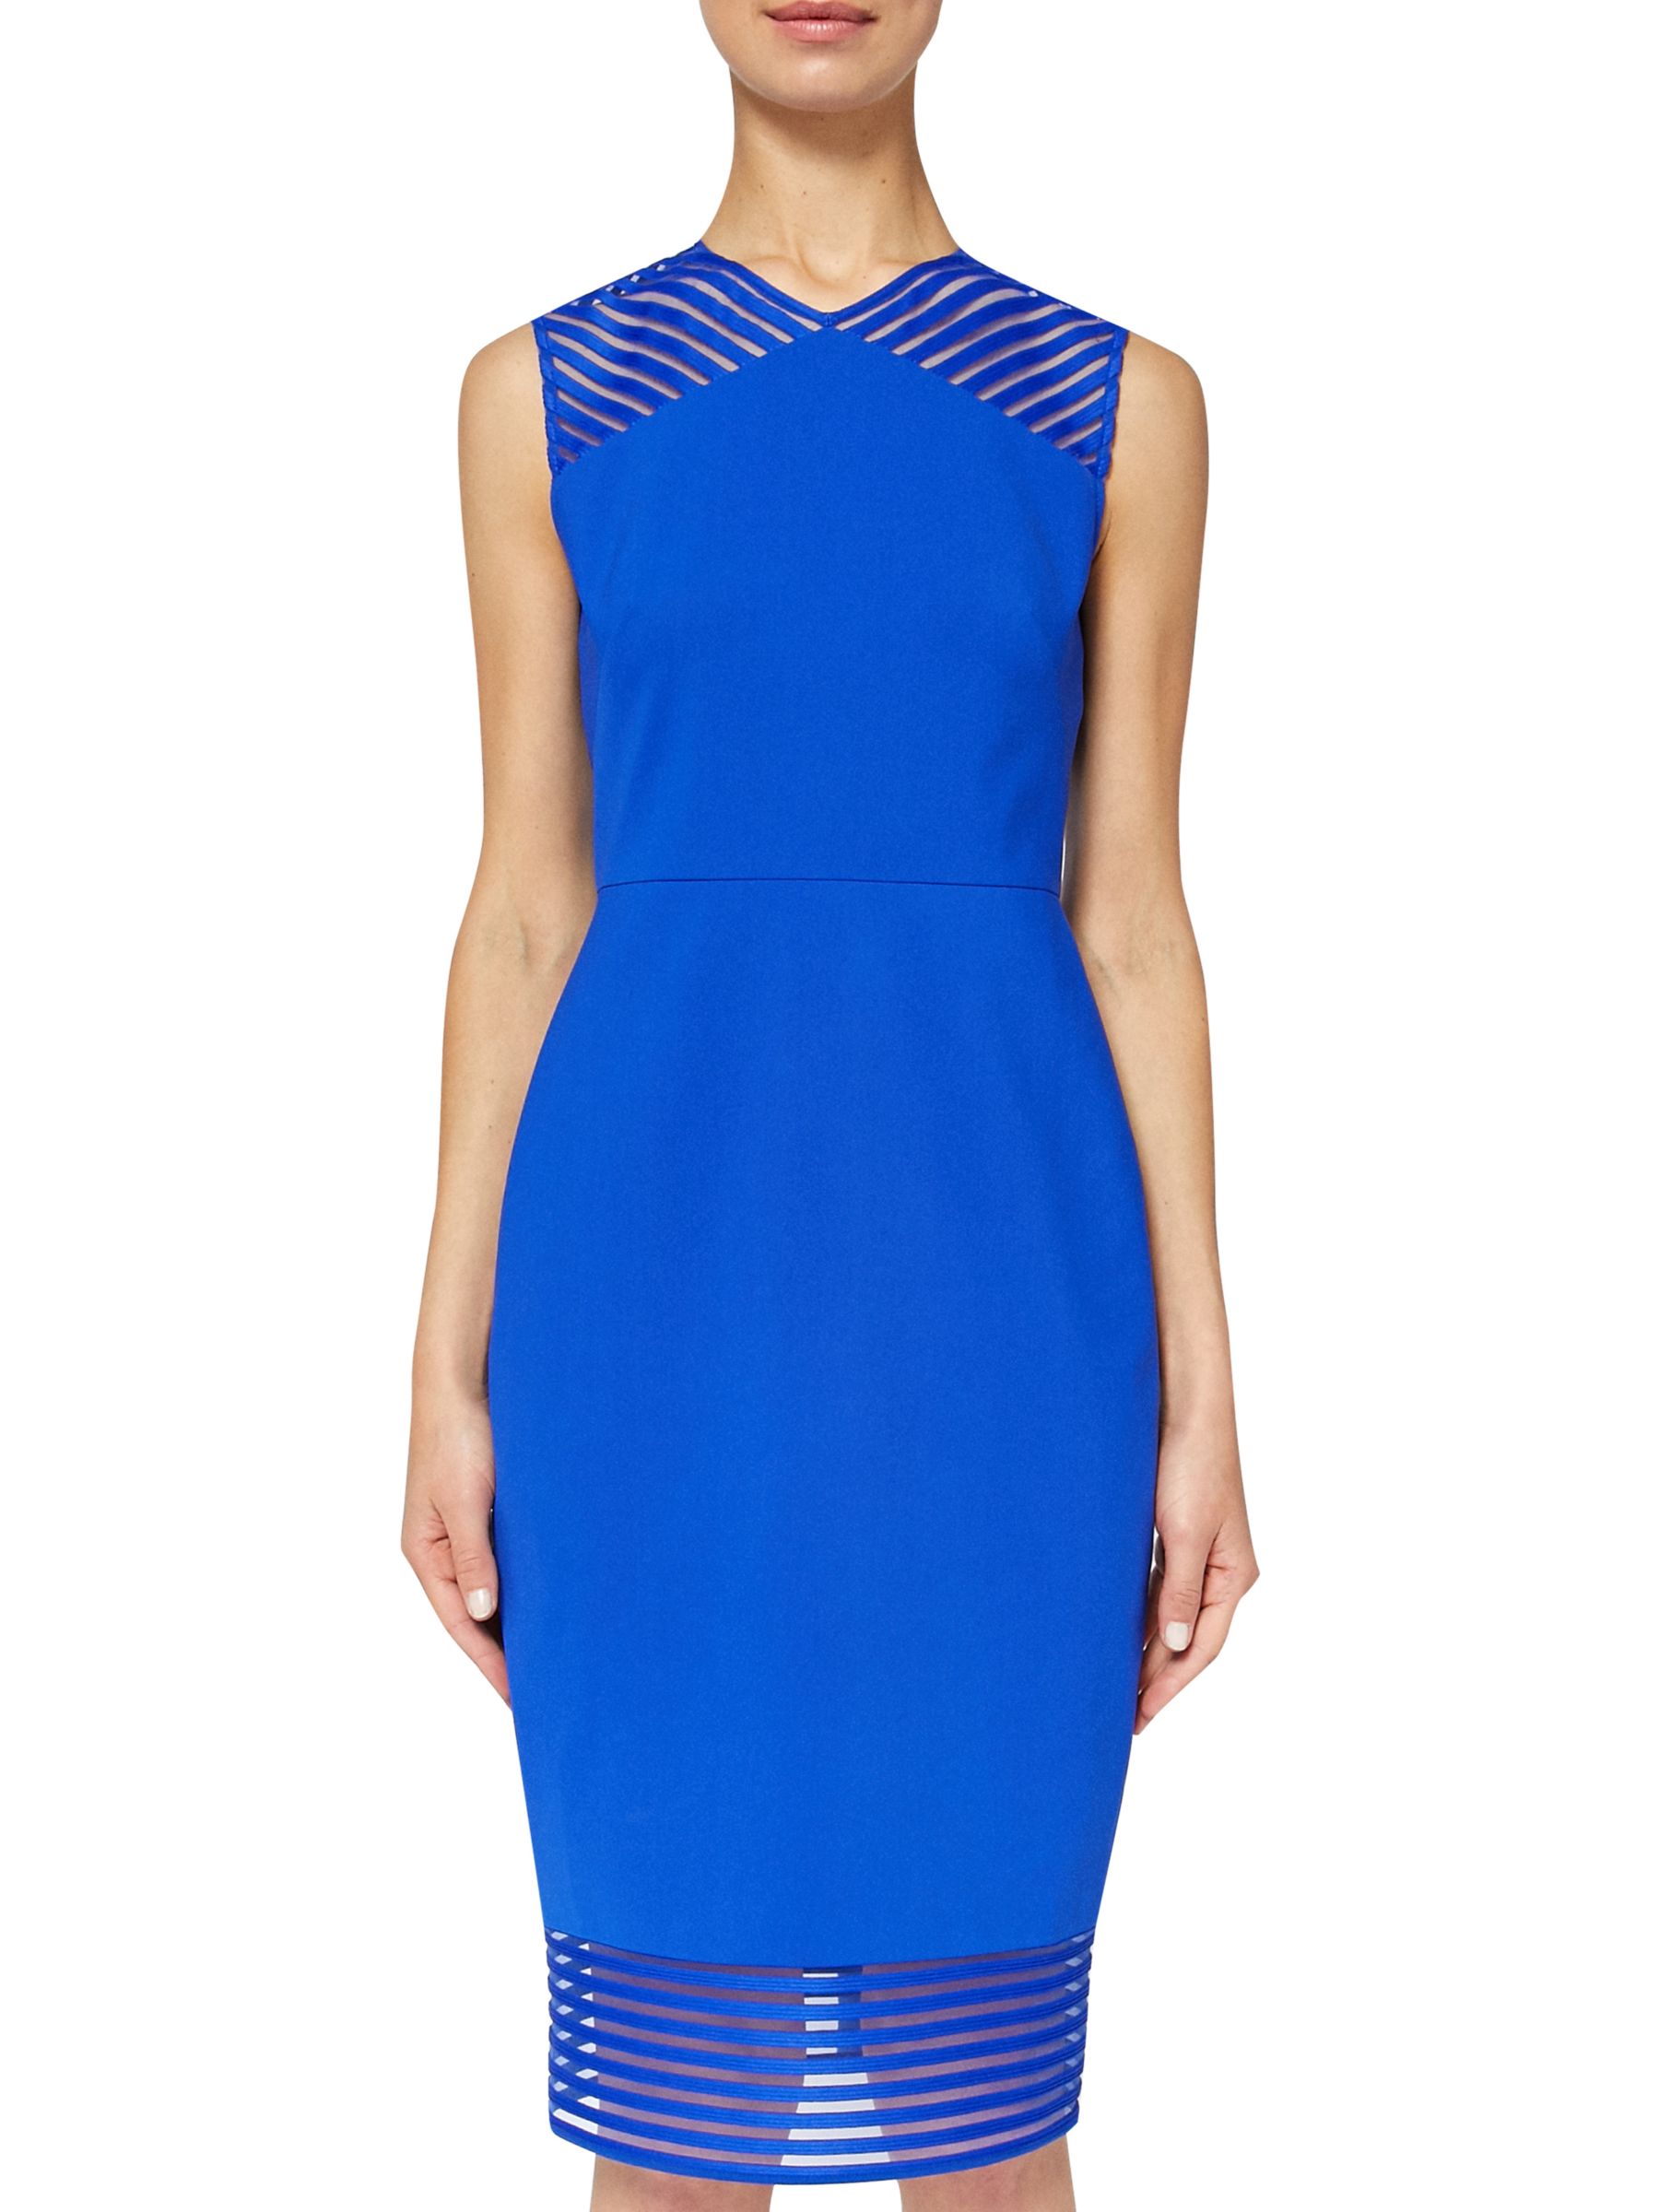 Ted Baker Lucette Bodycon Dress, Bright Blue